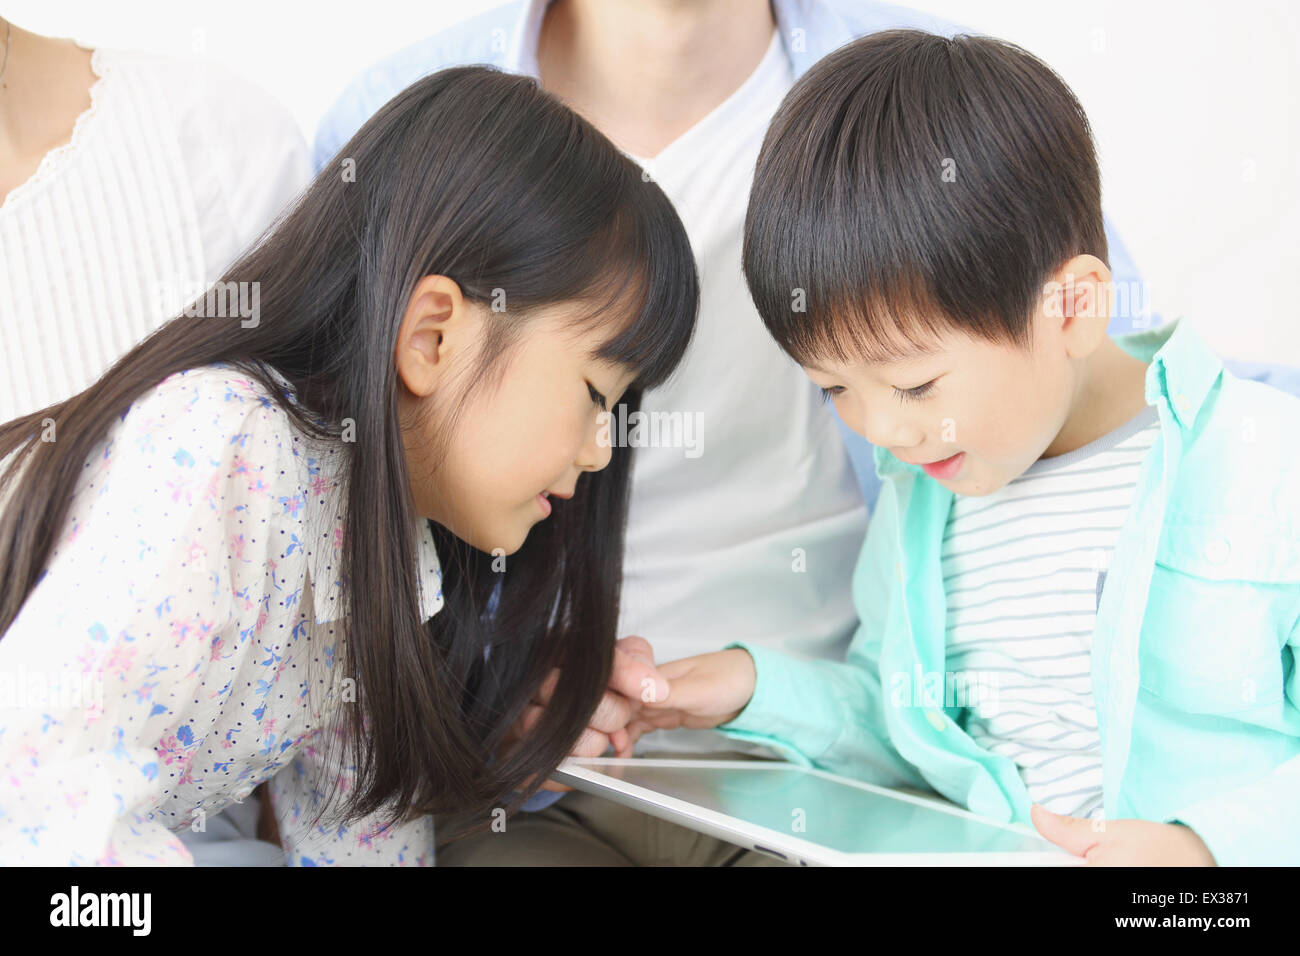 Japanese family playing with tablet Stock Photo